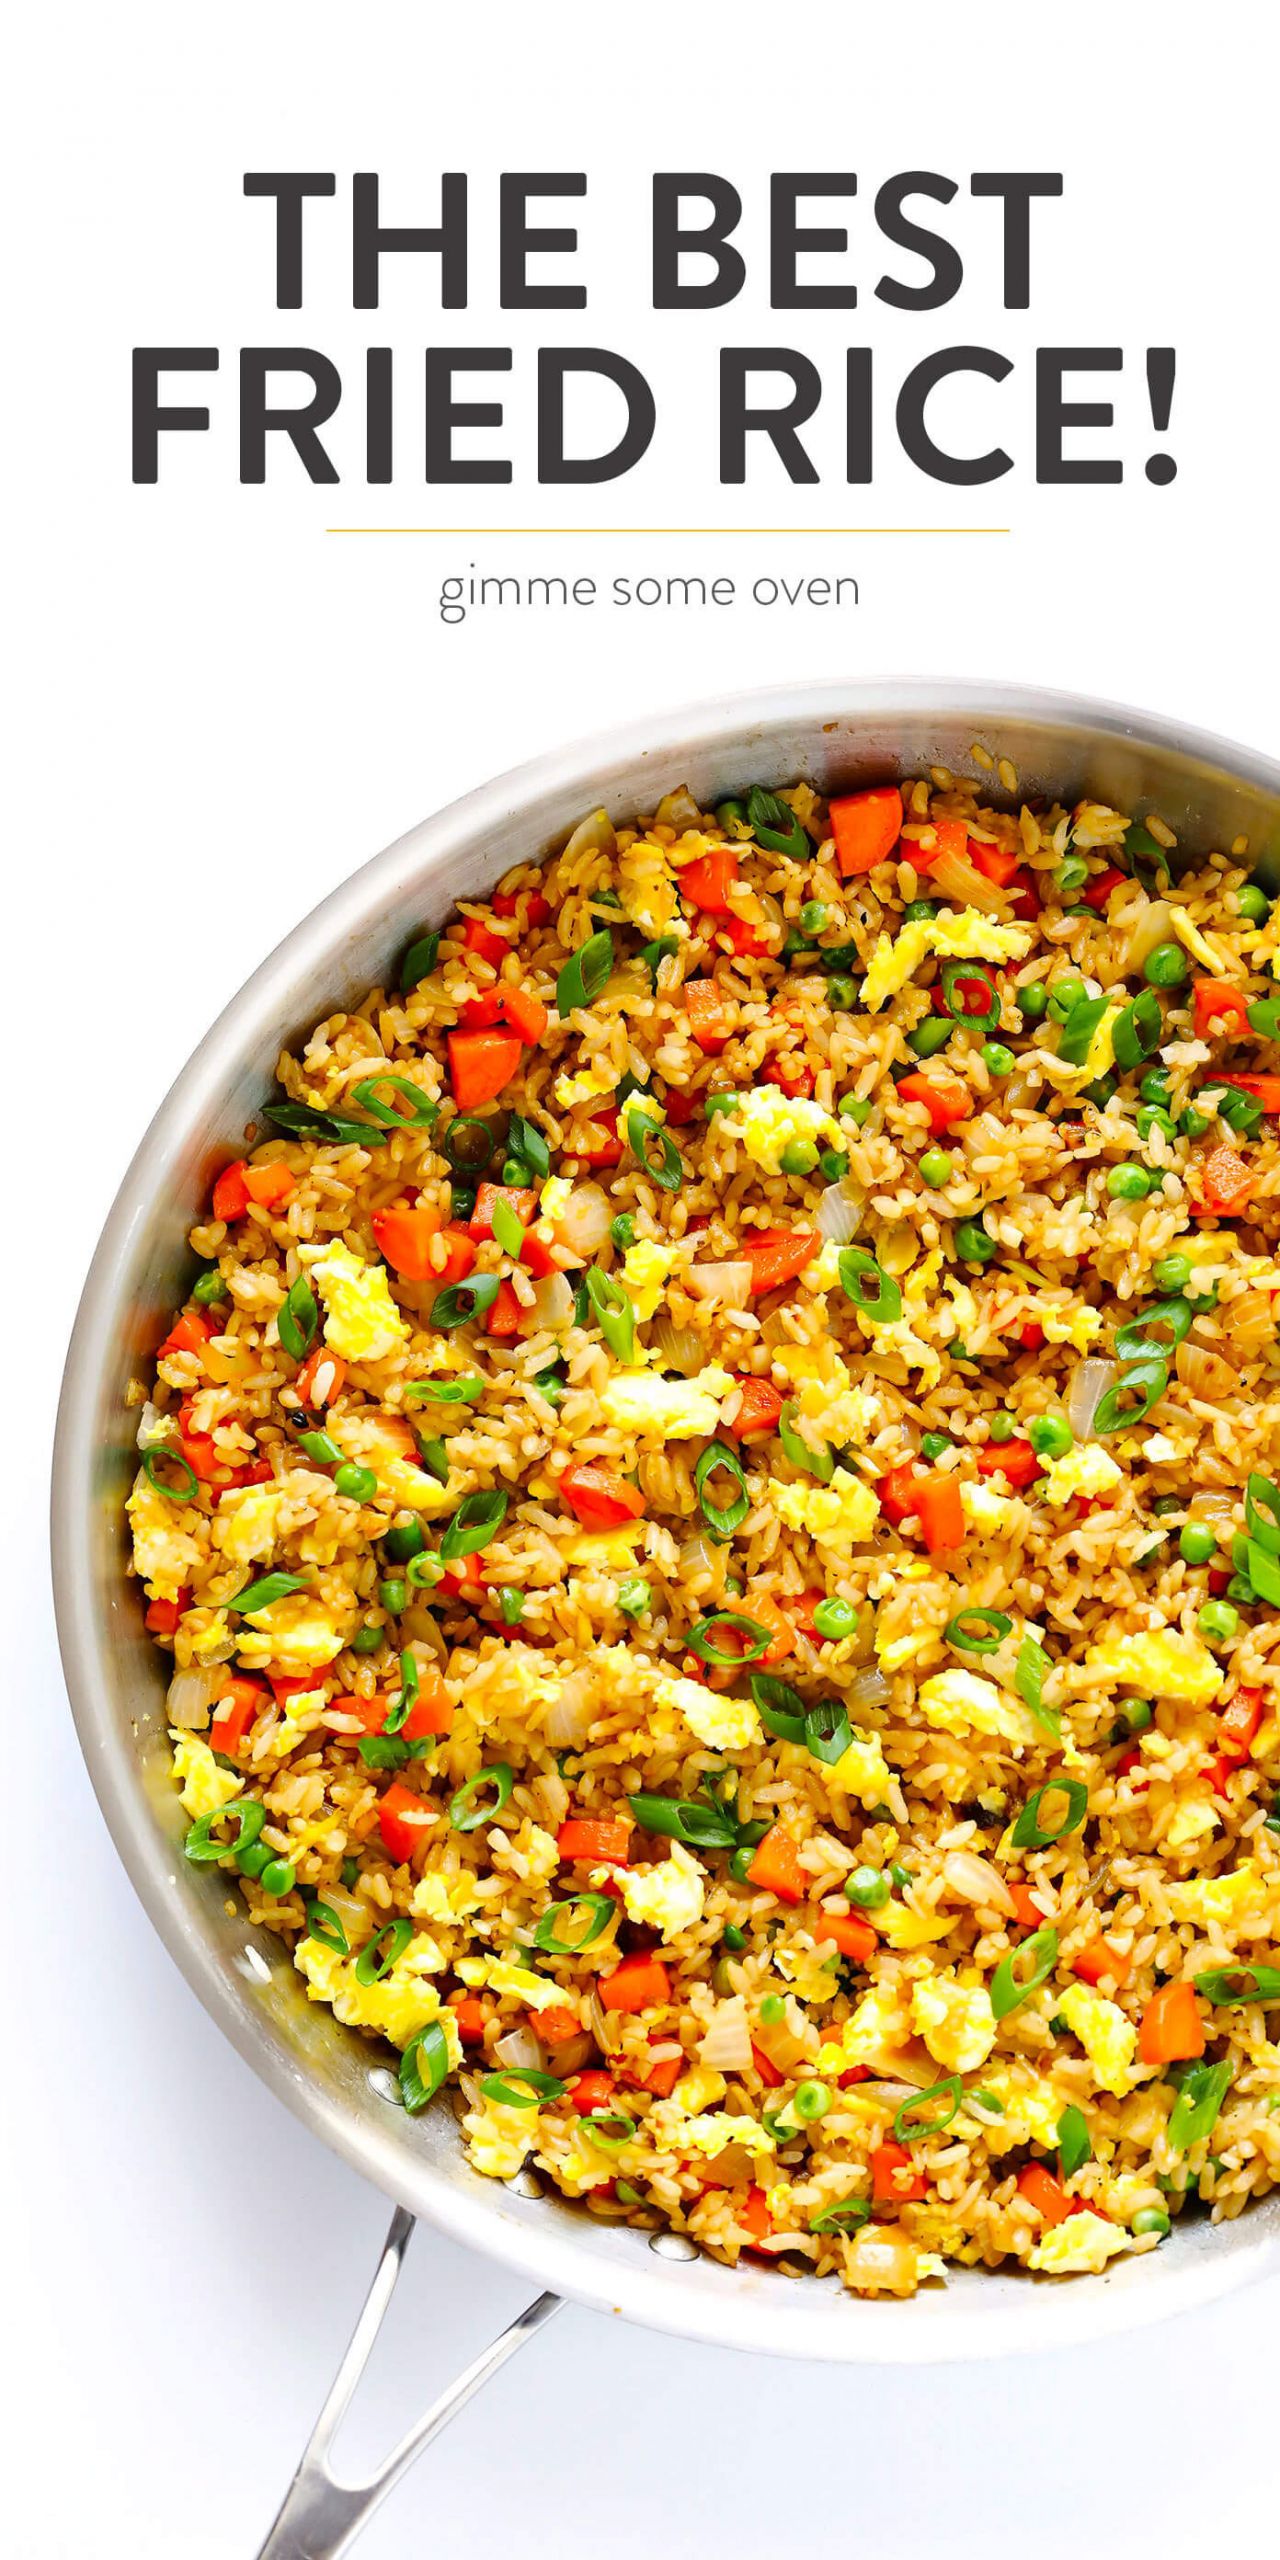 Recipes Chinese Fried Rice
 The BEST Fried Rice